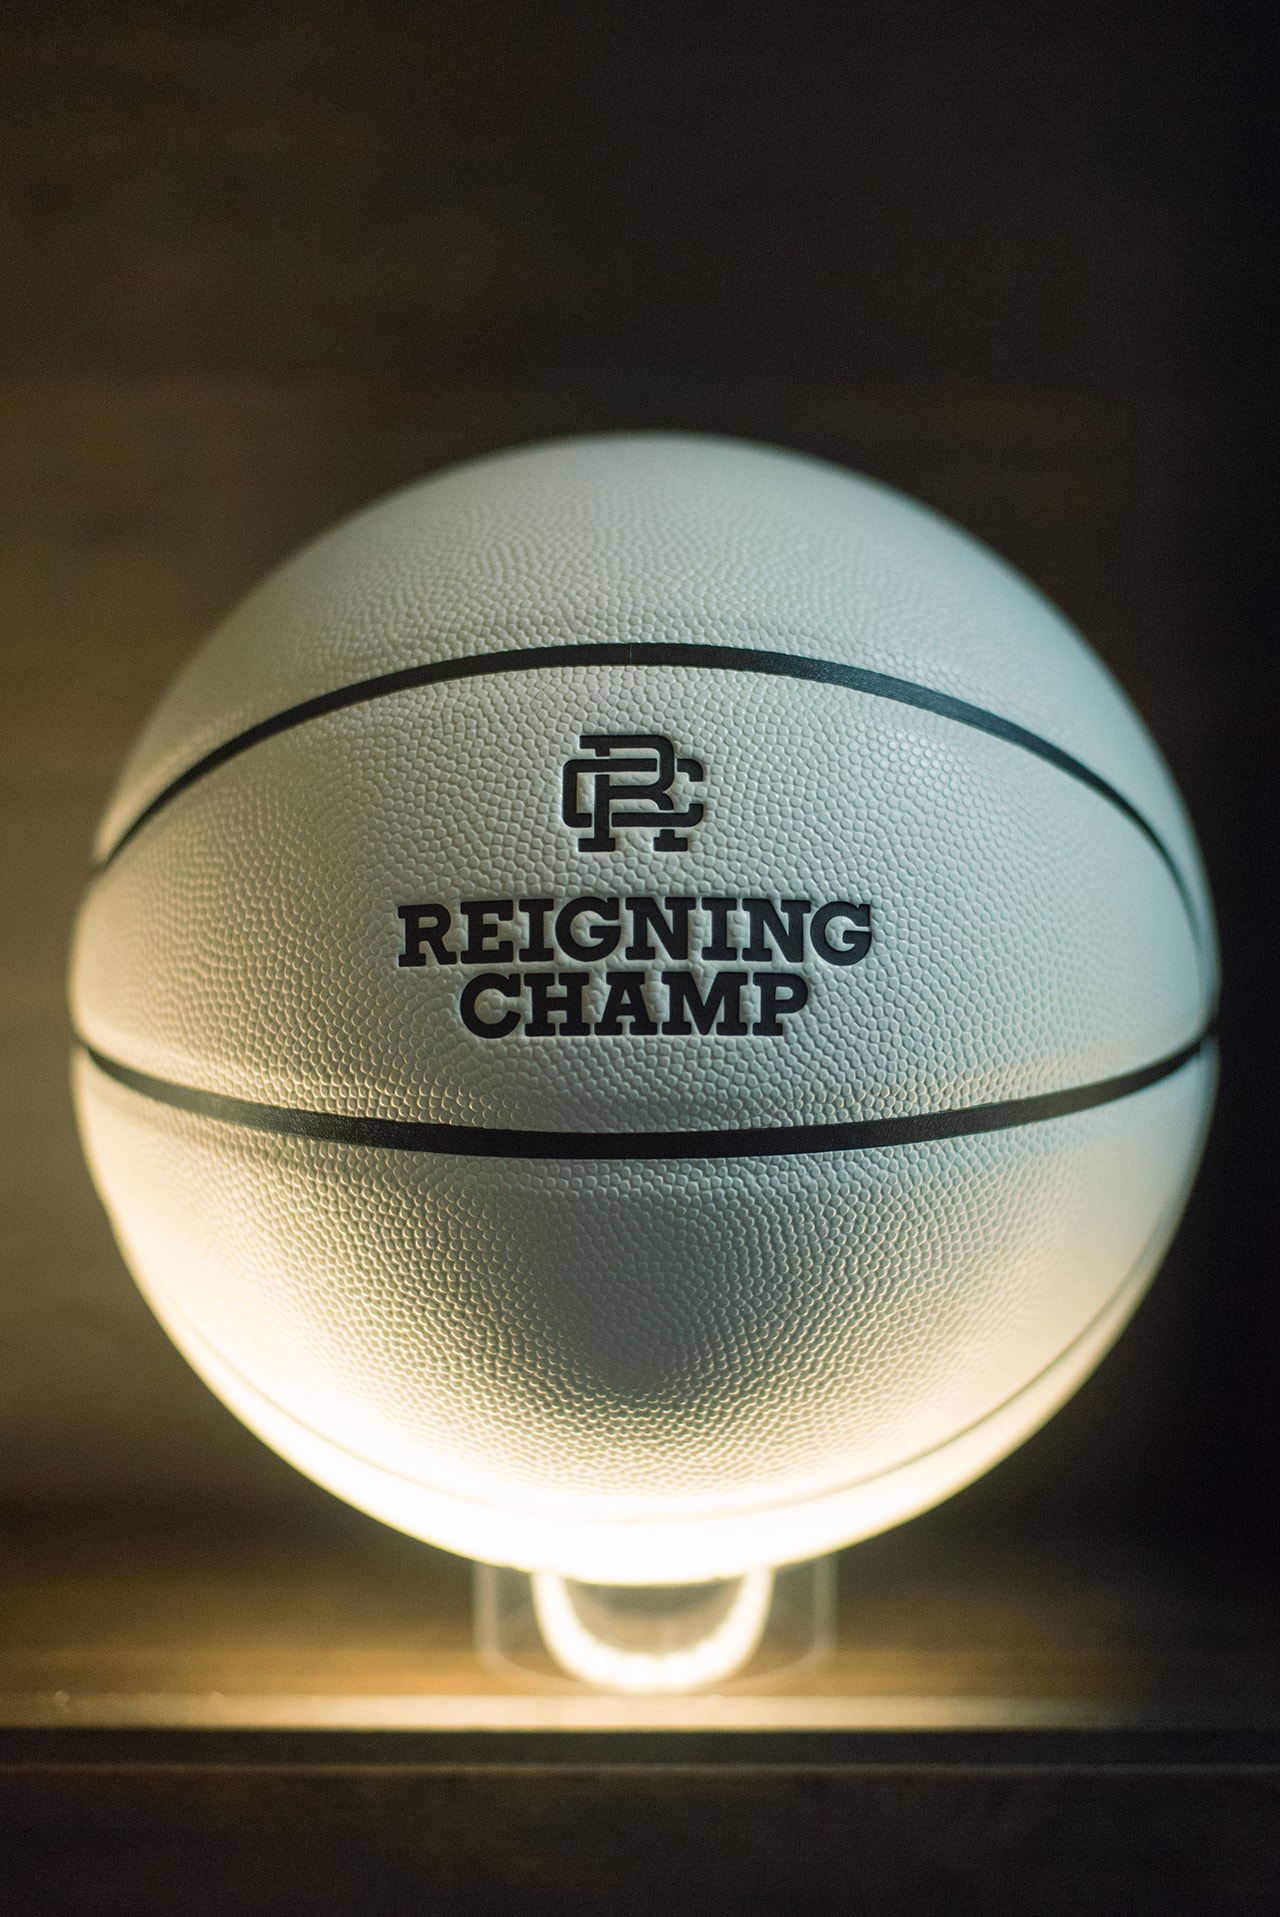 Reigning Champ AnnaLena Arena Dinner Series Sports Vancouver Canada Sportswear Brand basketball